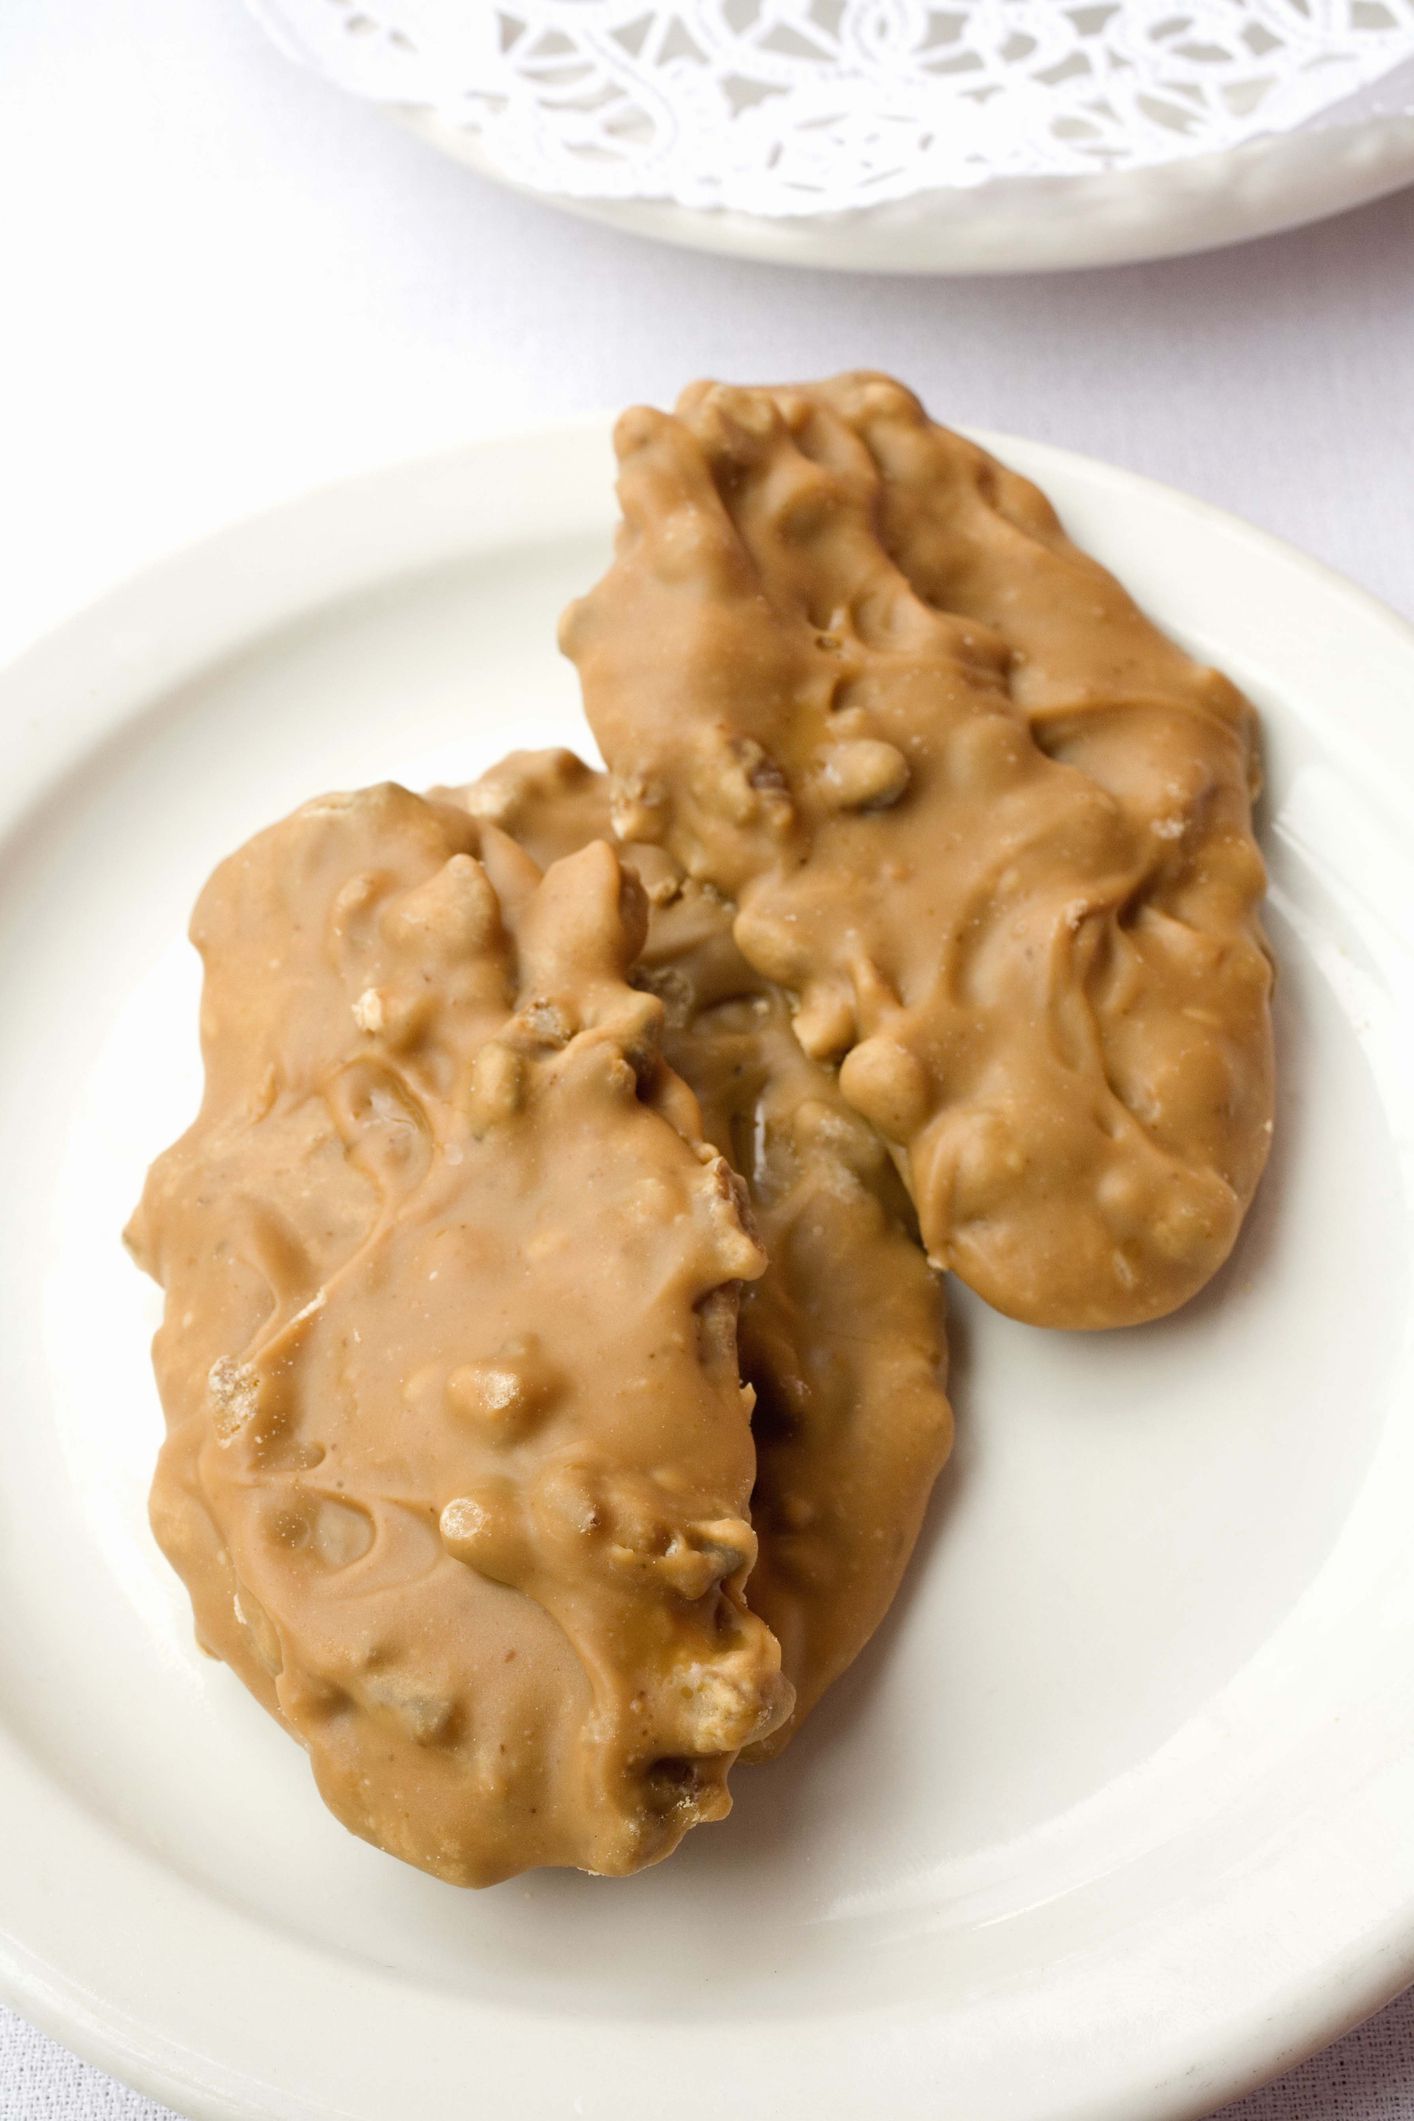 What Are Pralines? How to Make Pralines